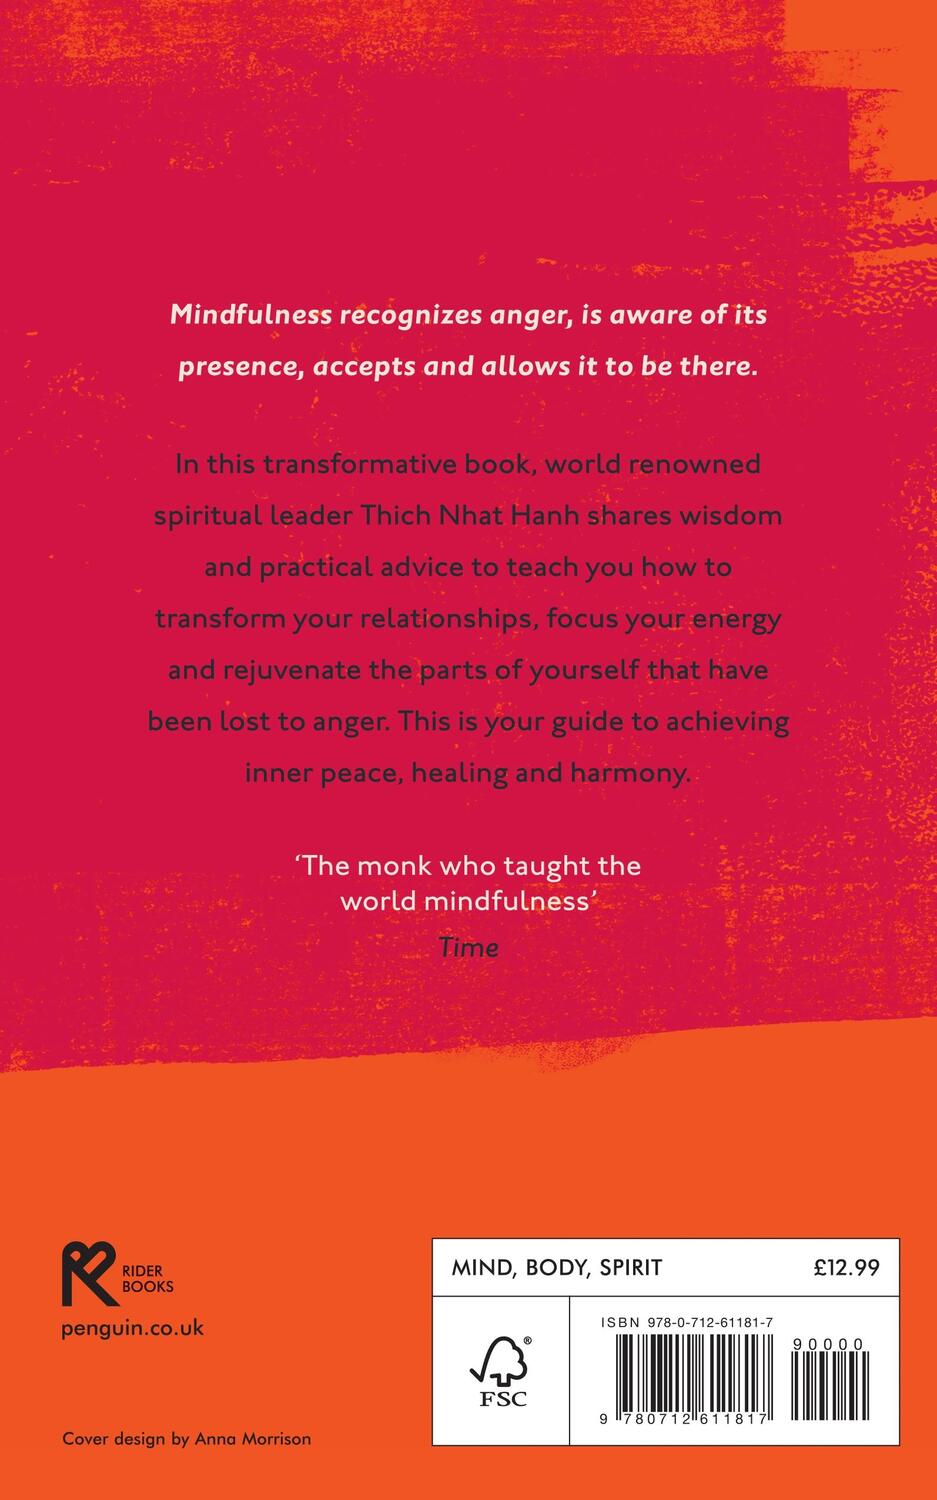 Rückseite: 9780712611817 | Anger | Buddhist Wisdom for Cooling the Flames | Thich Nhat Hanh